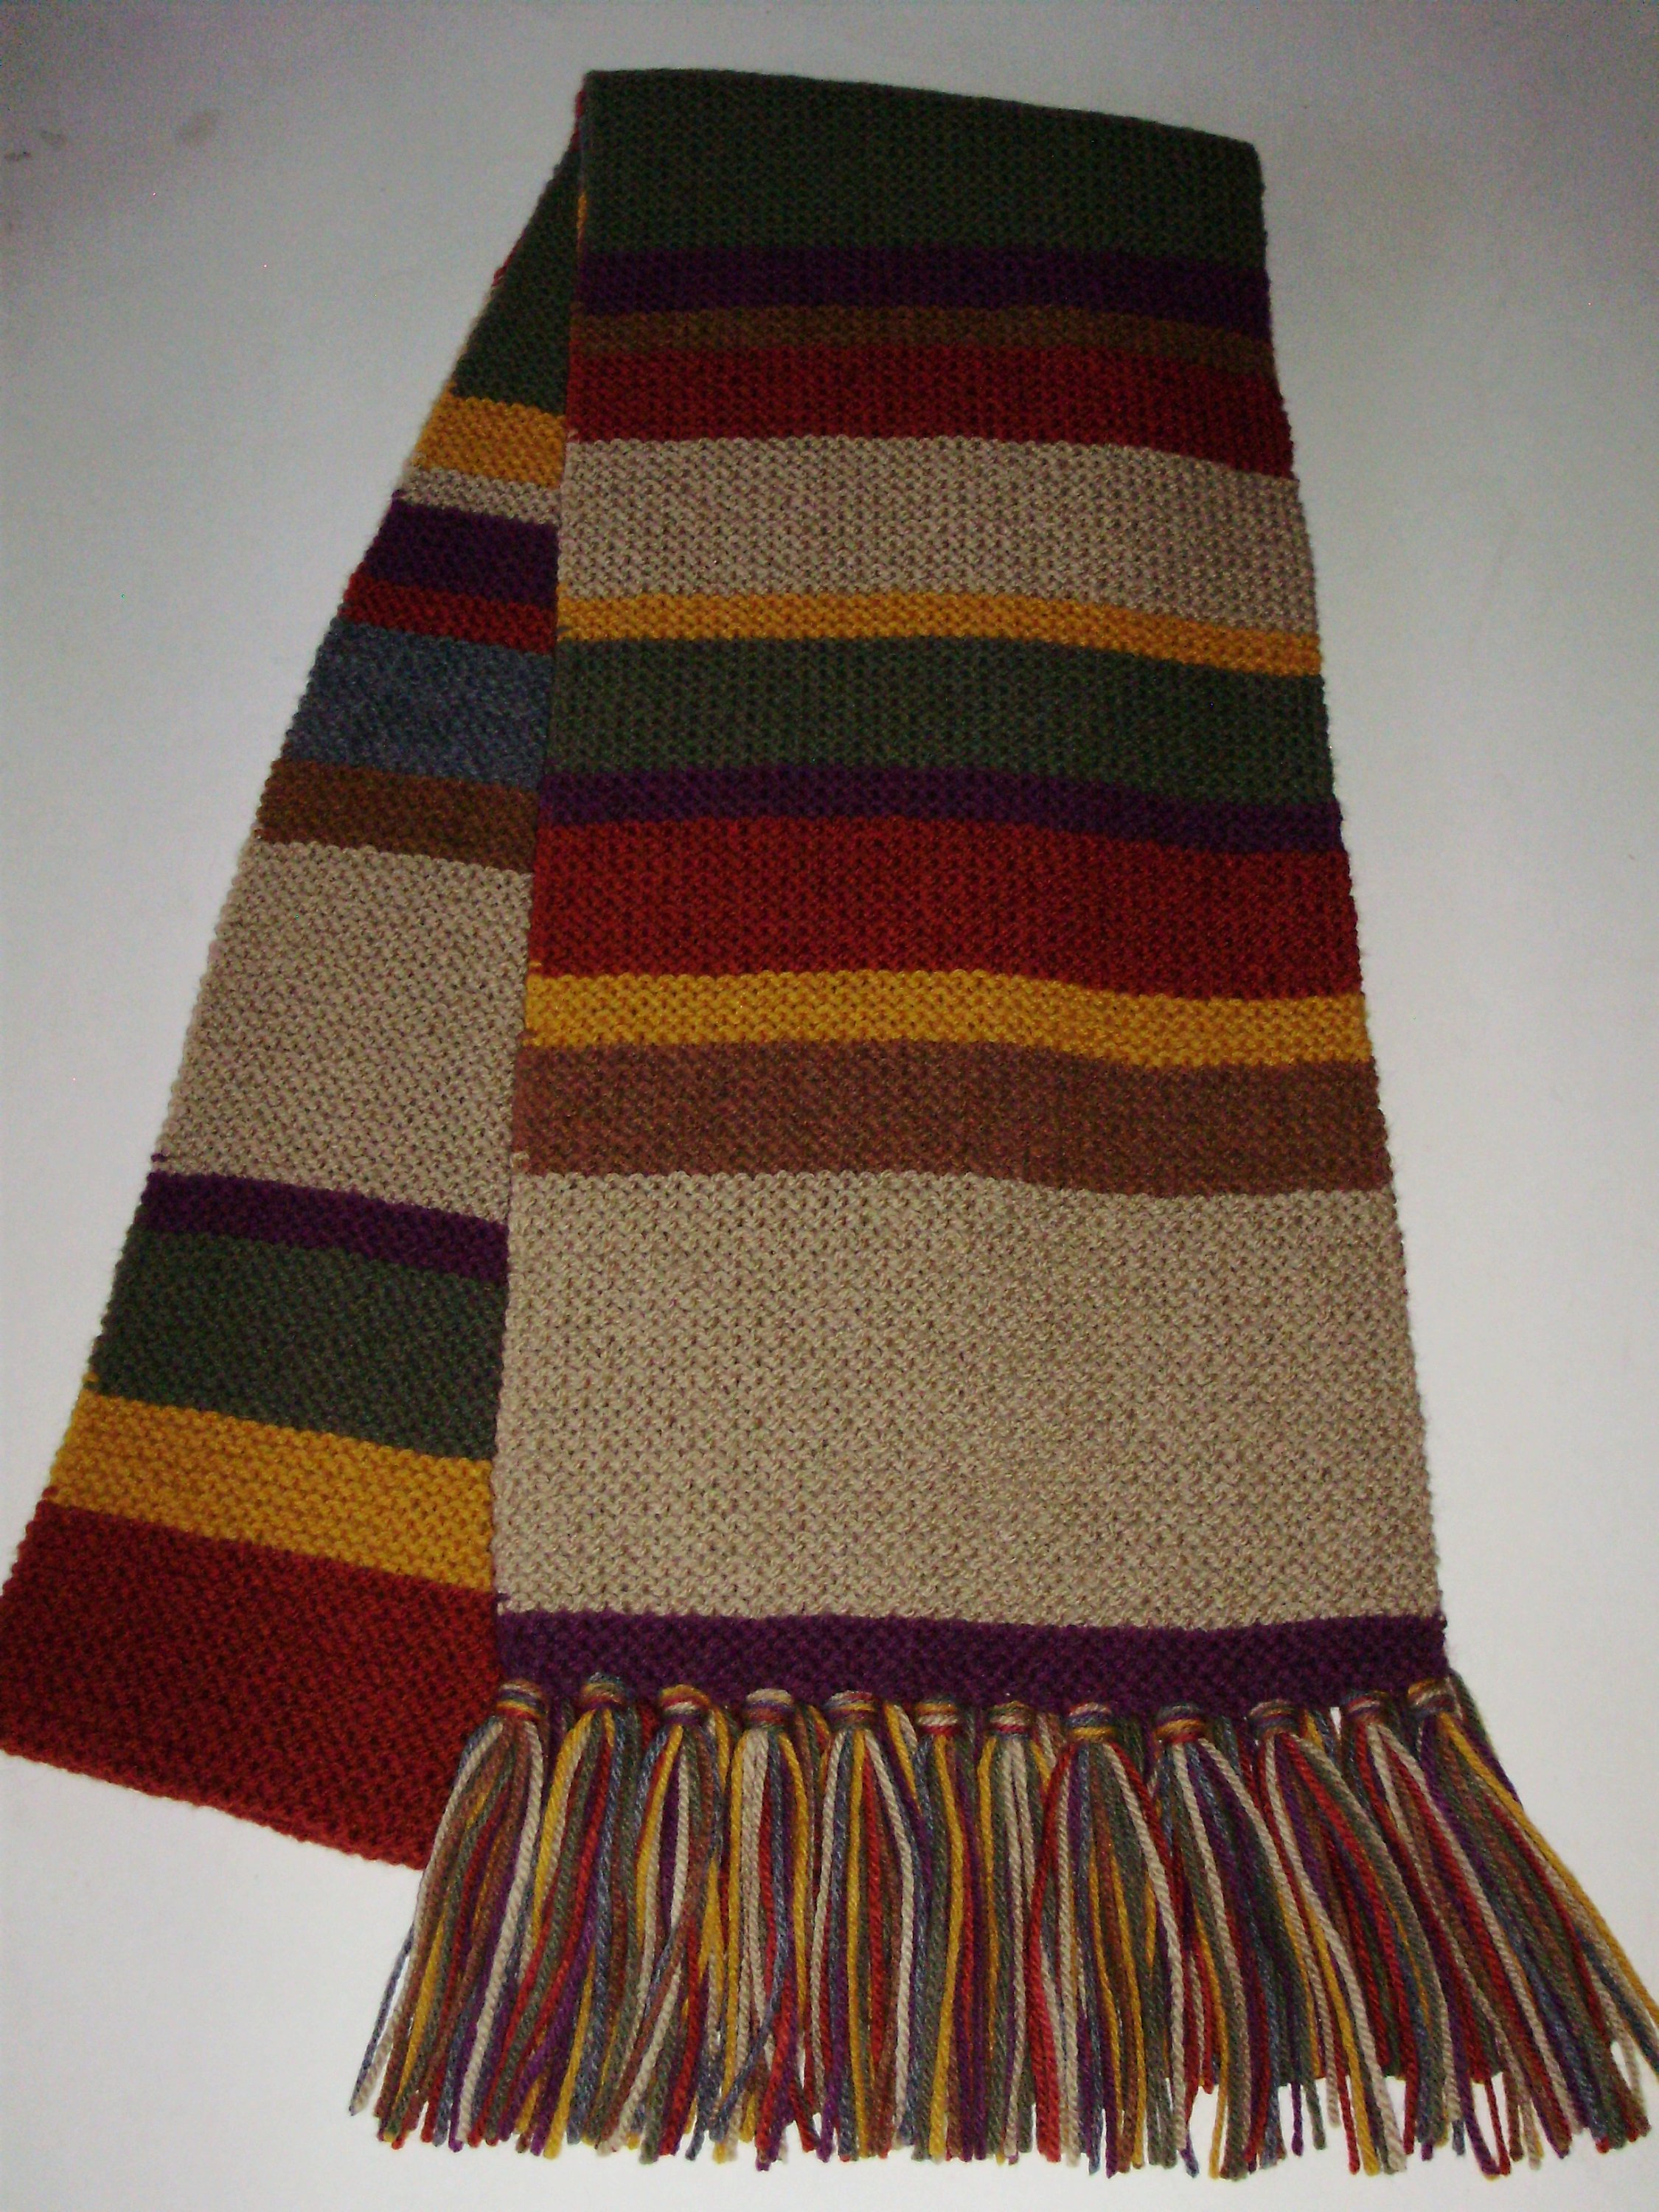 Dr Who Scarf Pattern Crochet Doctor Who Acrylicwool Seasons 12 1617 Style Scarf Garter Etsy